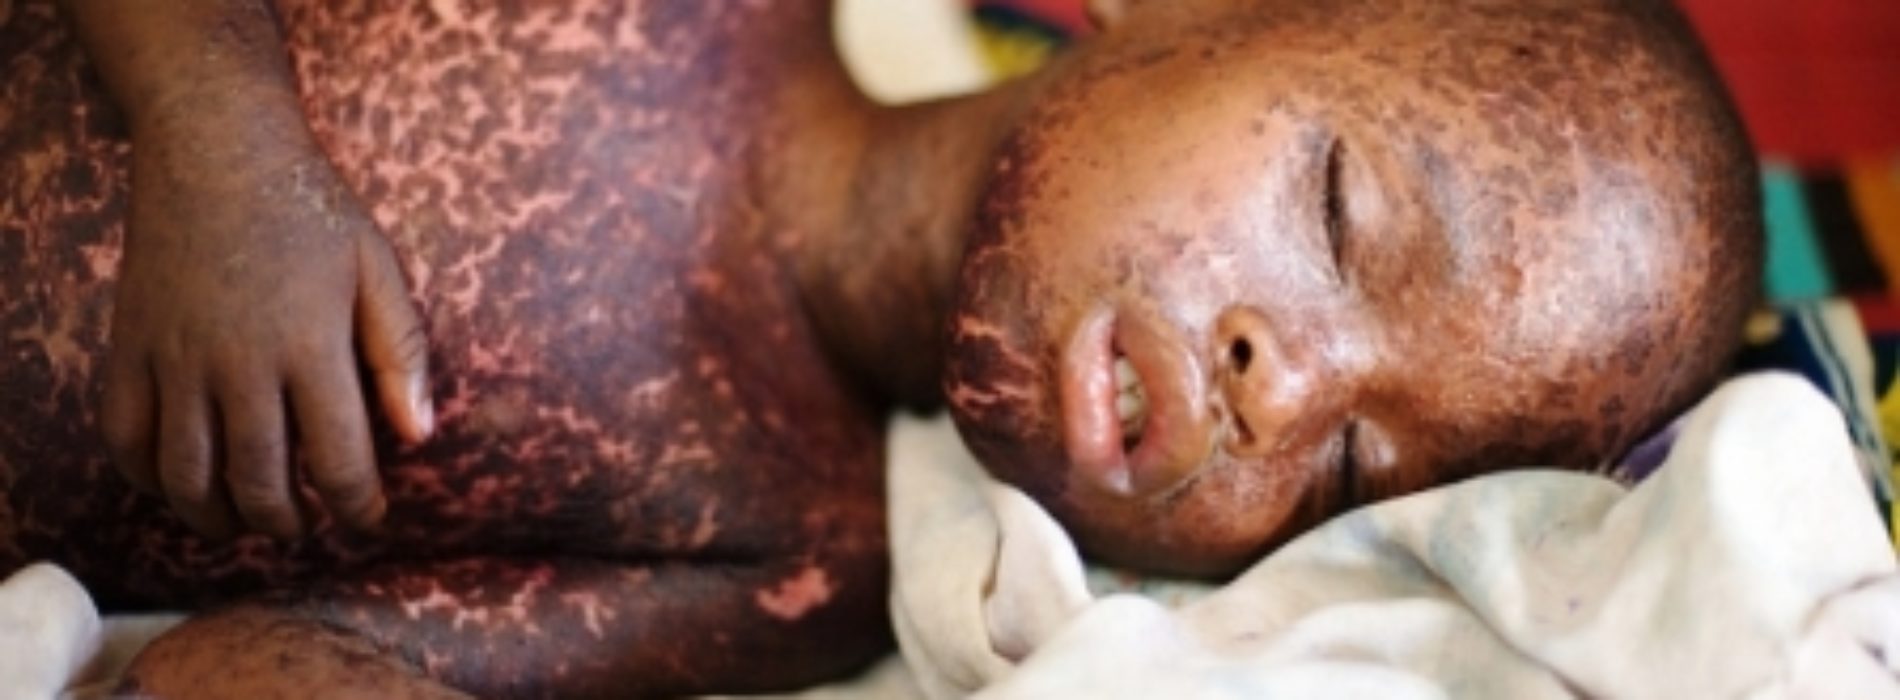 More than 140,000 die from measles as cases surge worldwide